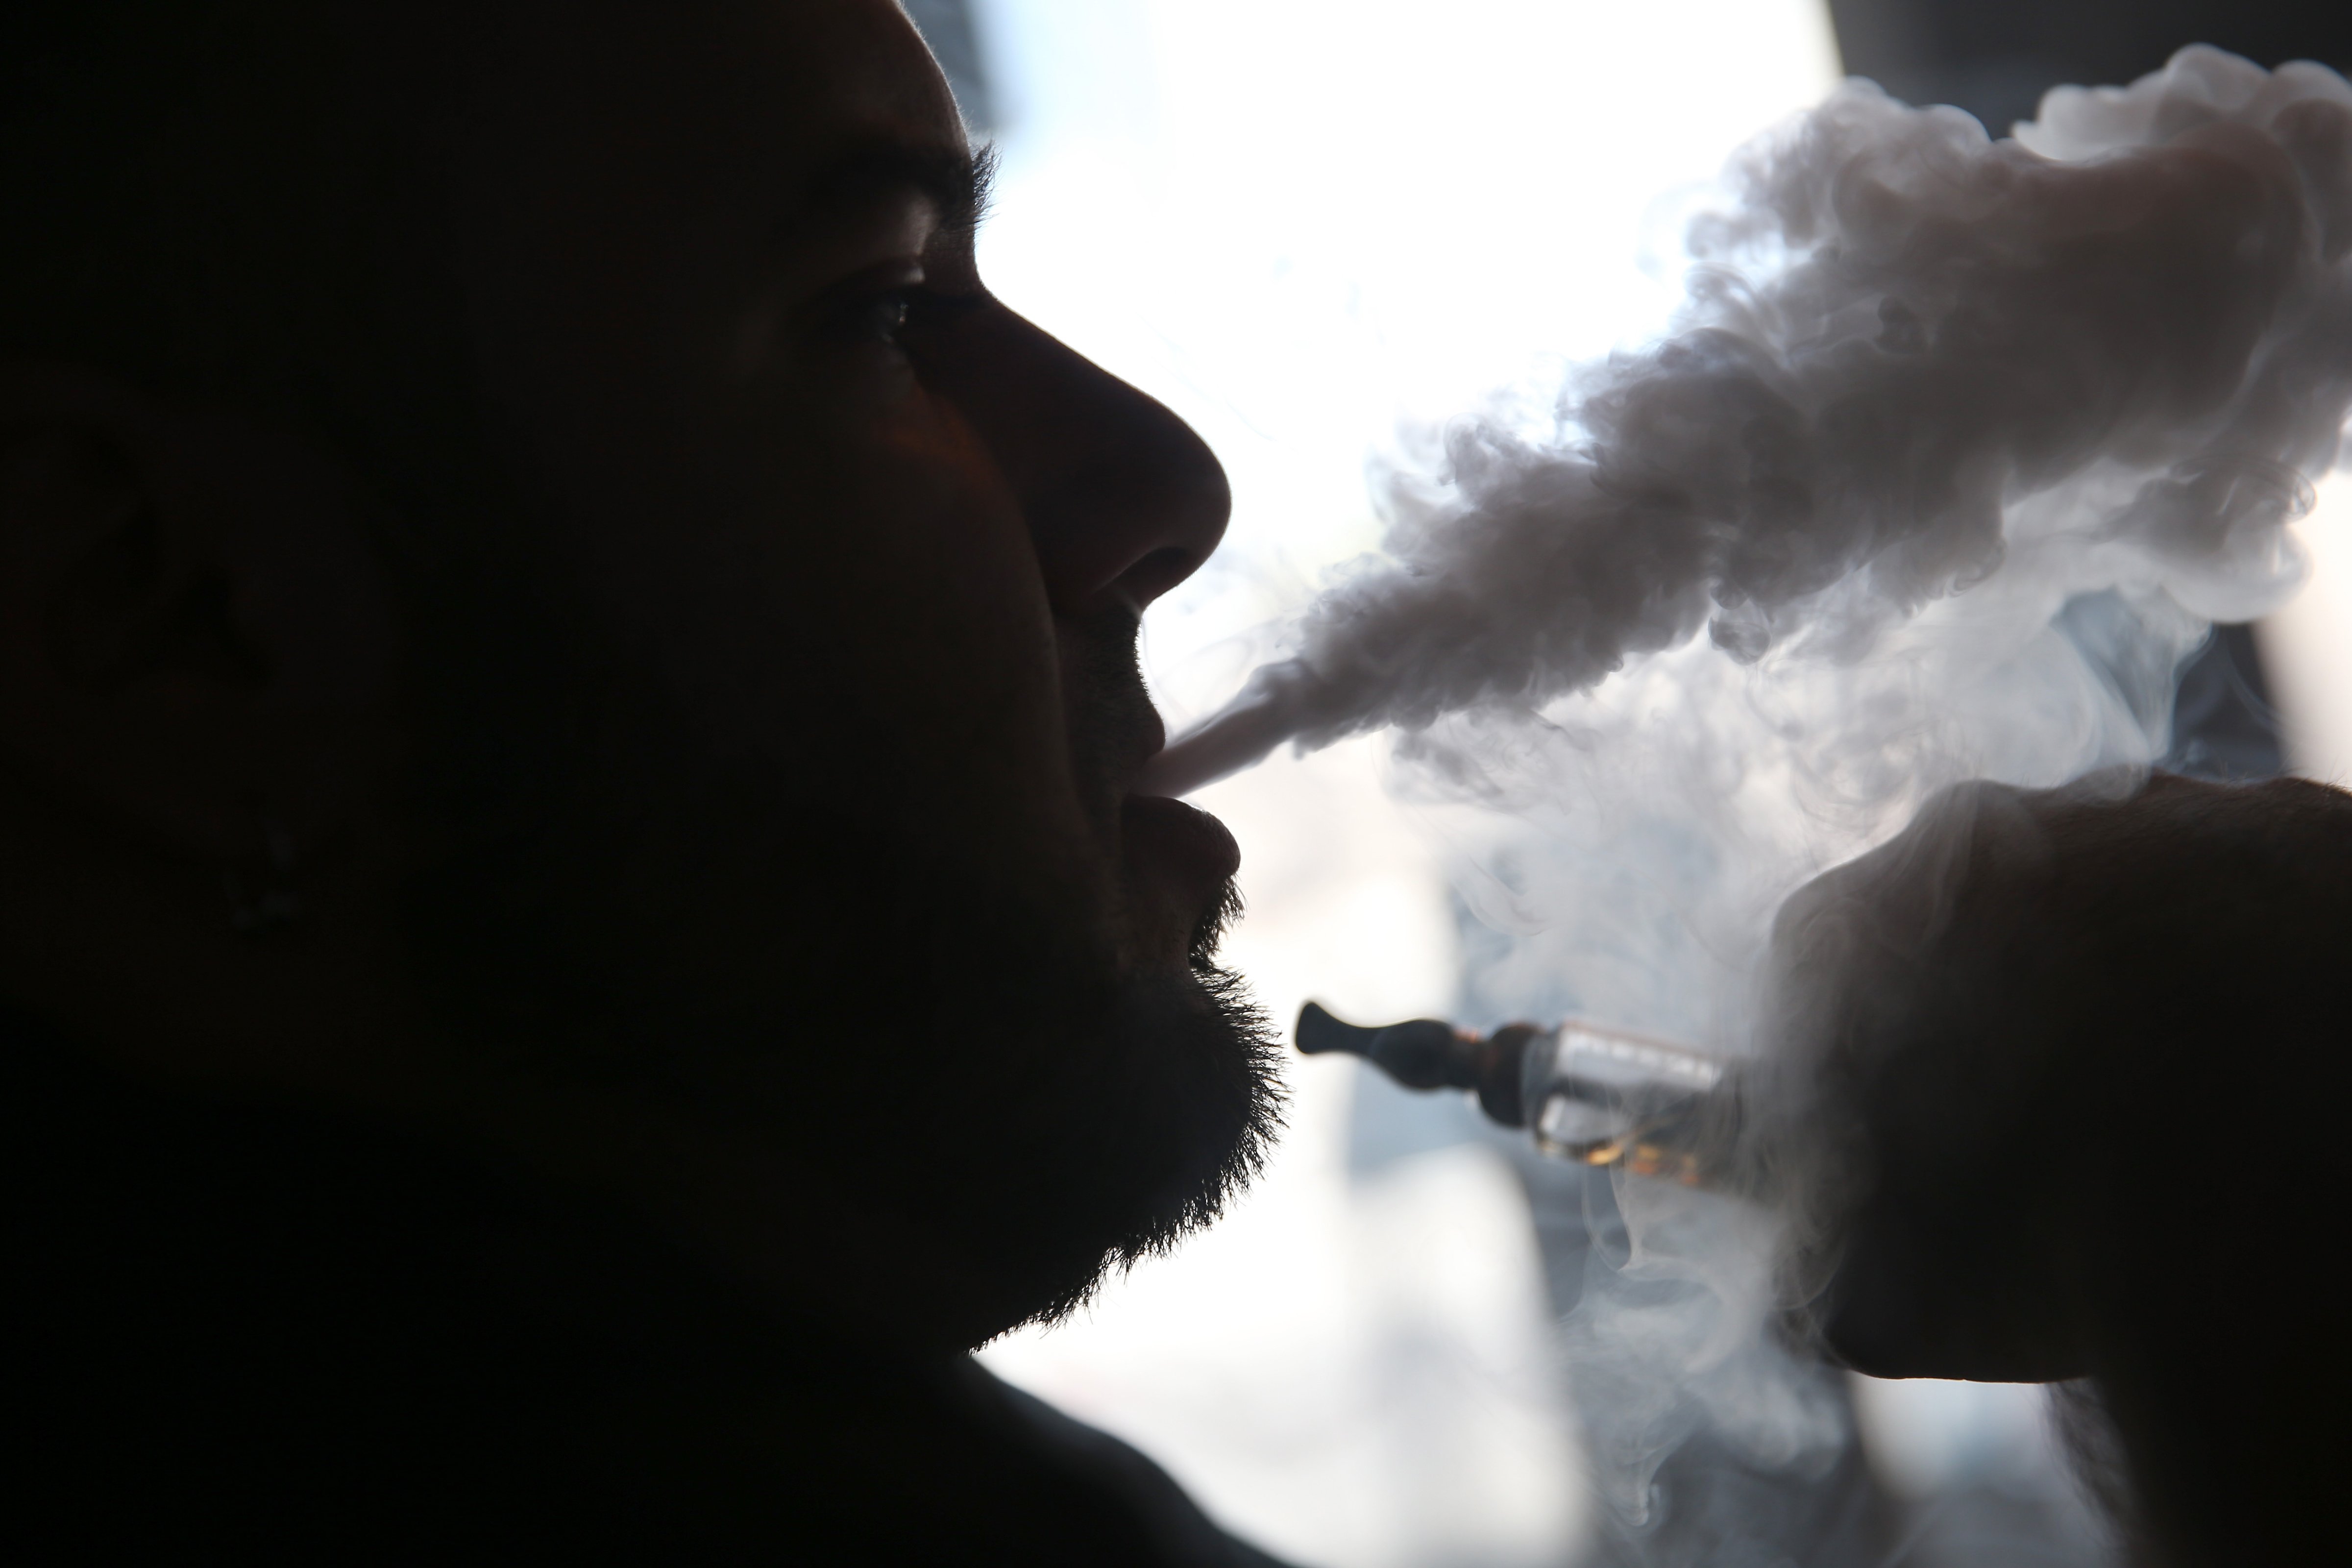 A salesman waits for customers as he enjoys an electronic cigarette at a store in Miami, Florida on April 24, 2014. (Joe Raedle—Getty Images)